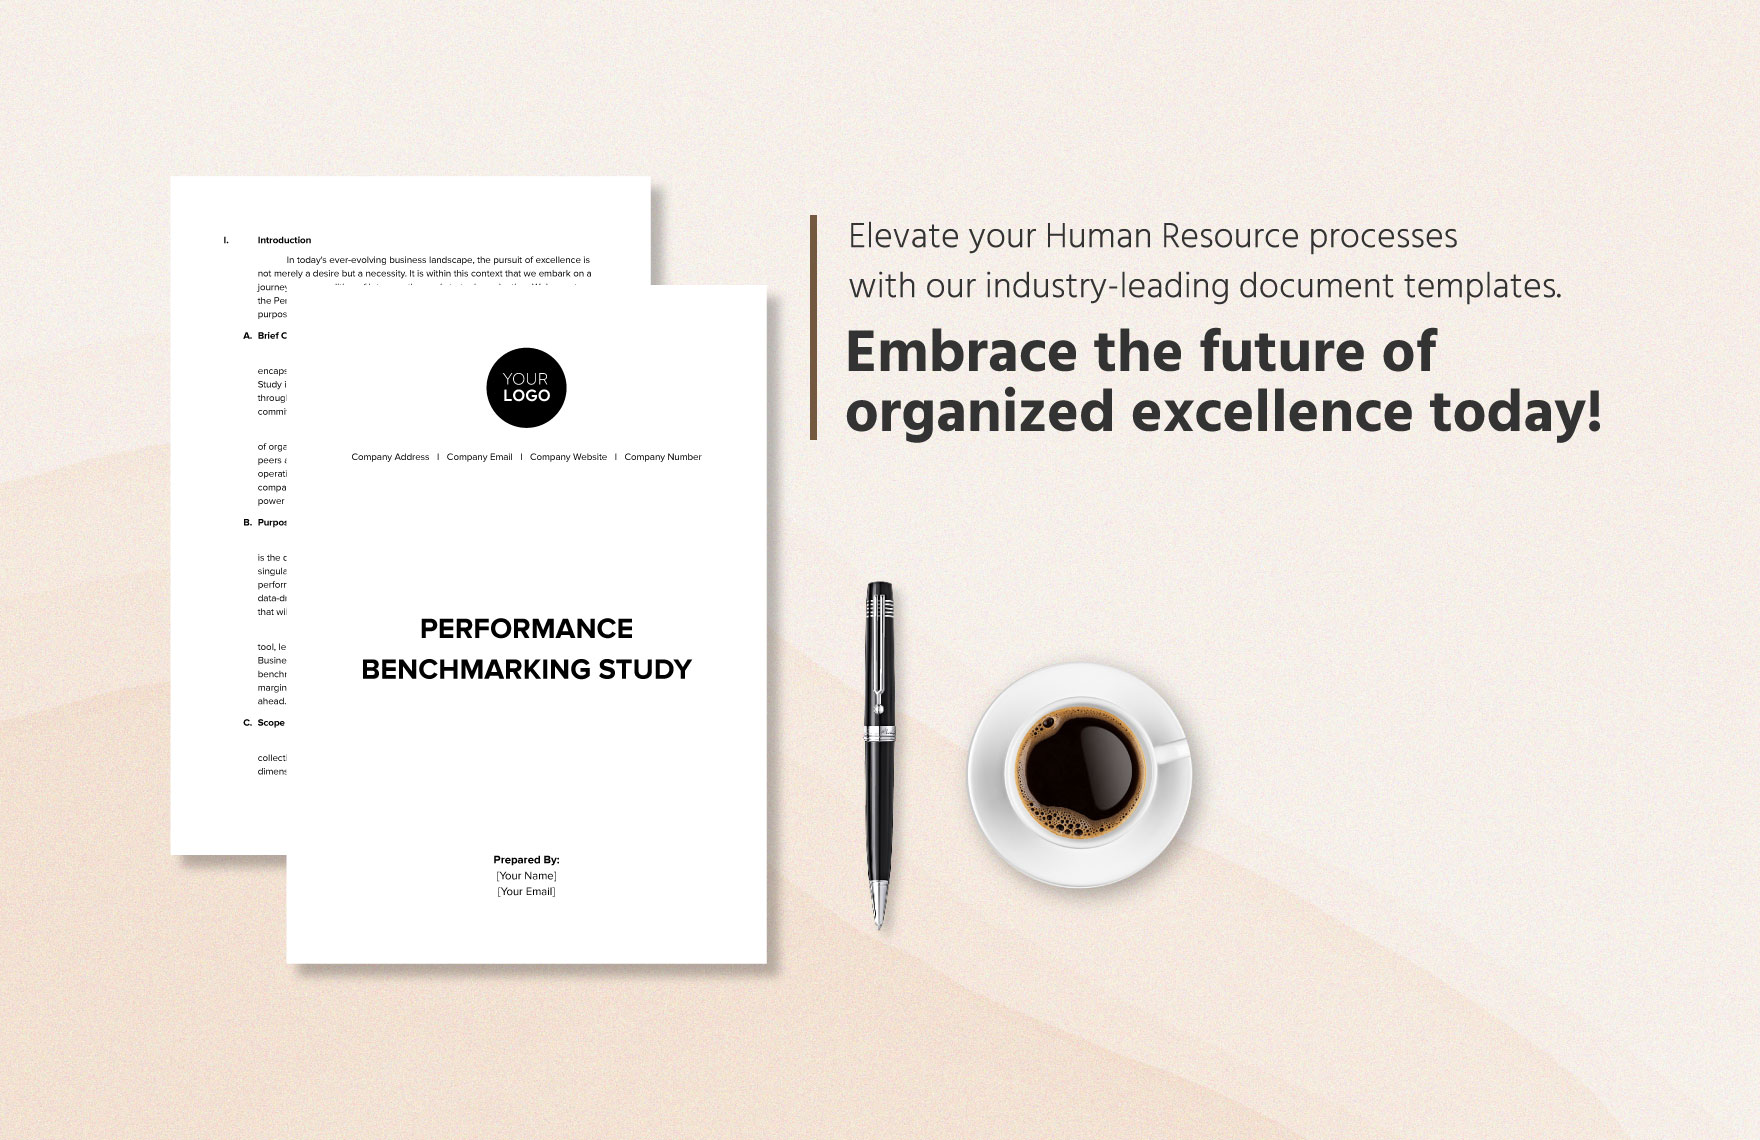 Performance Benchmarking Study HR Template